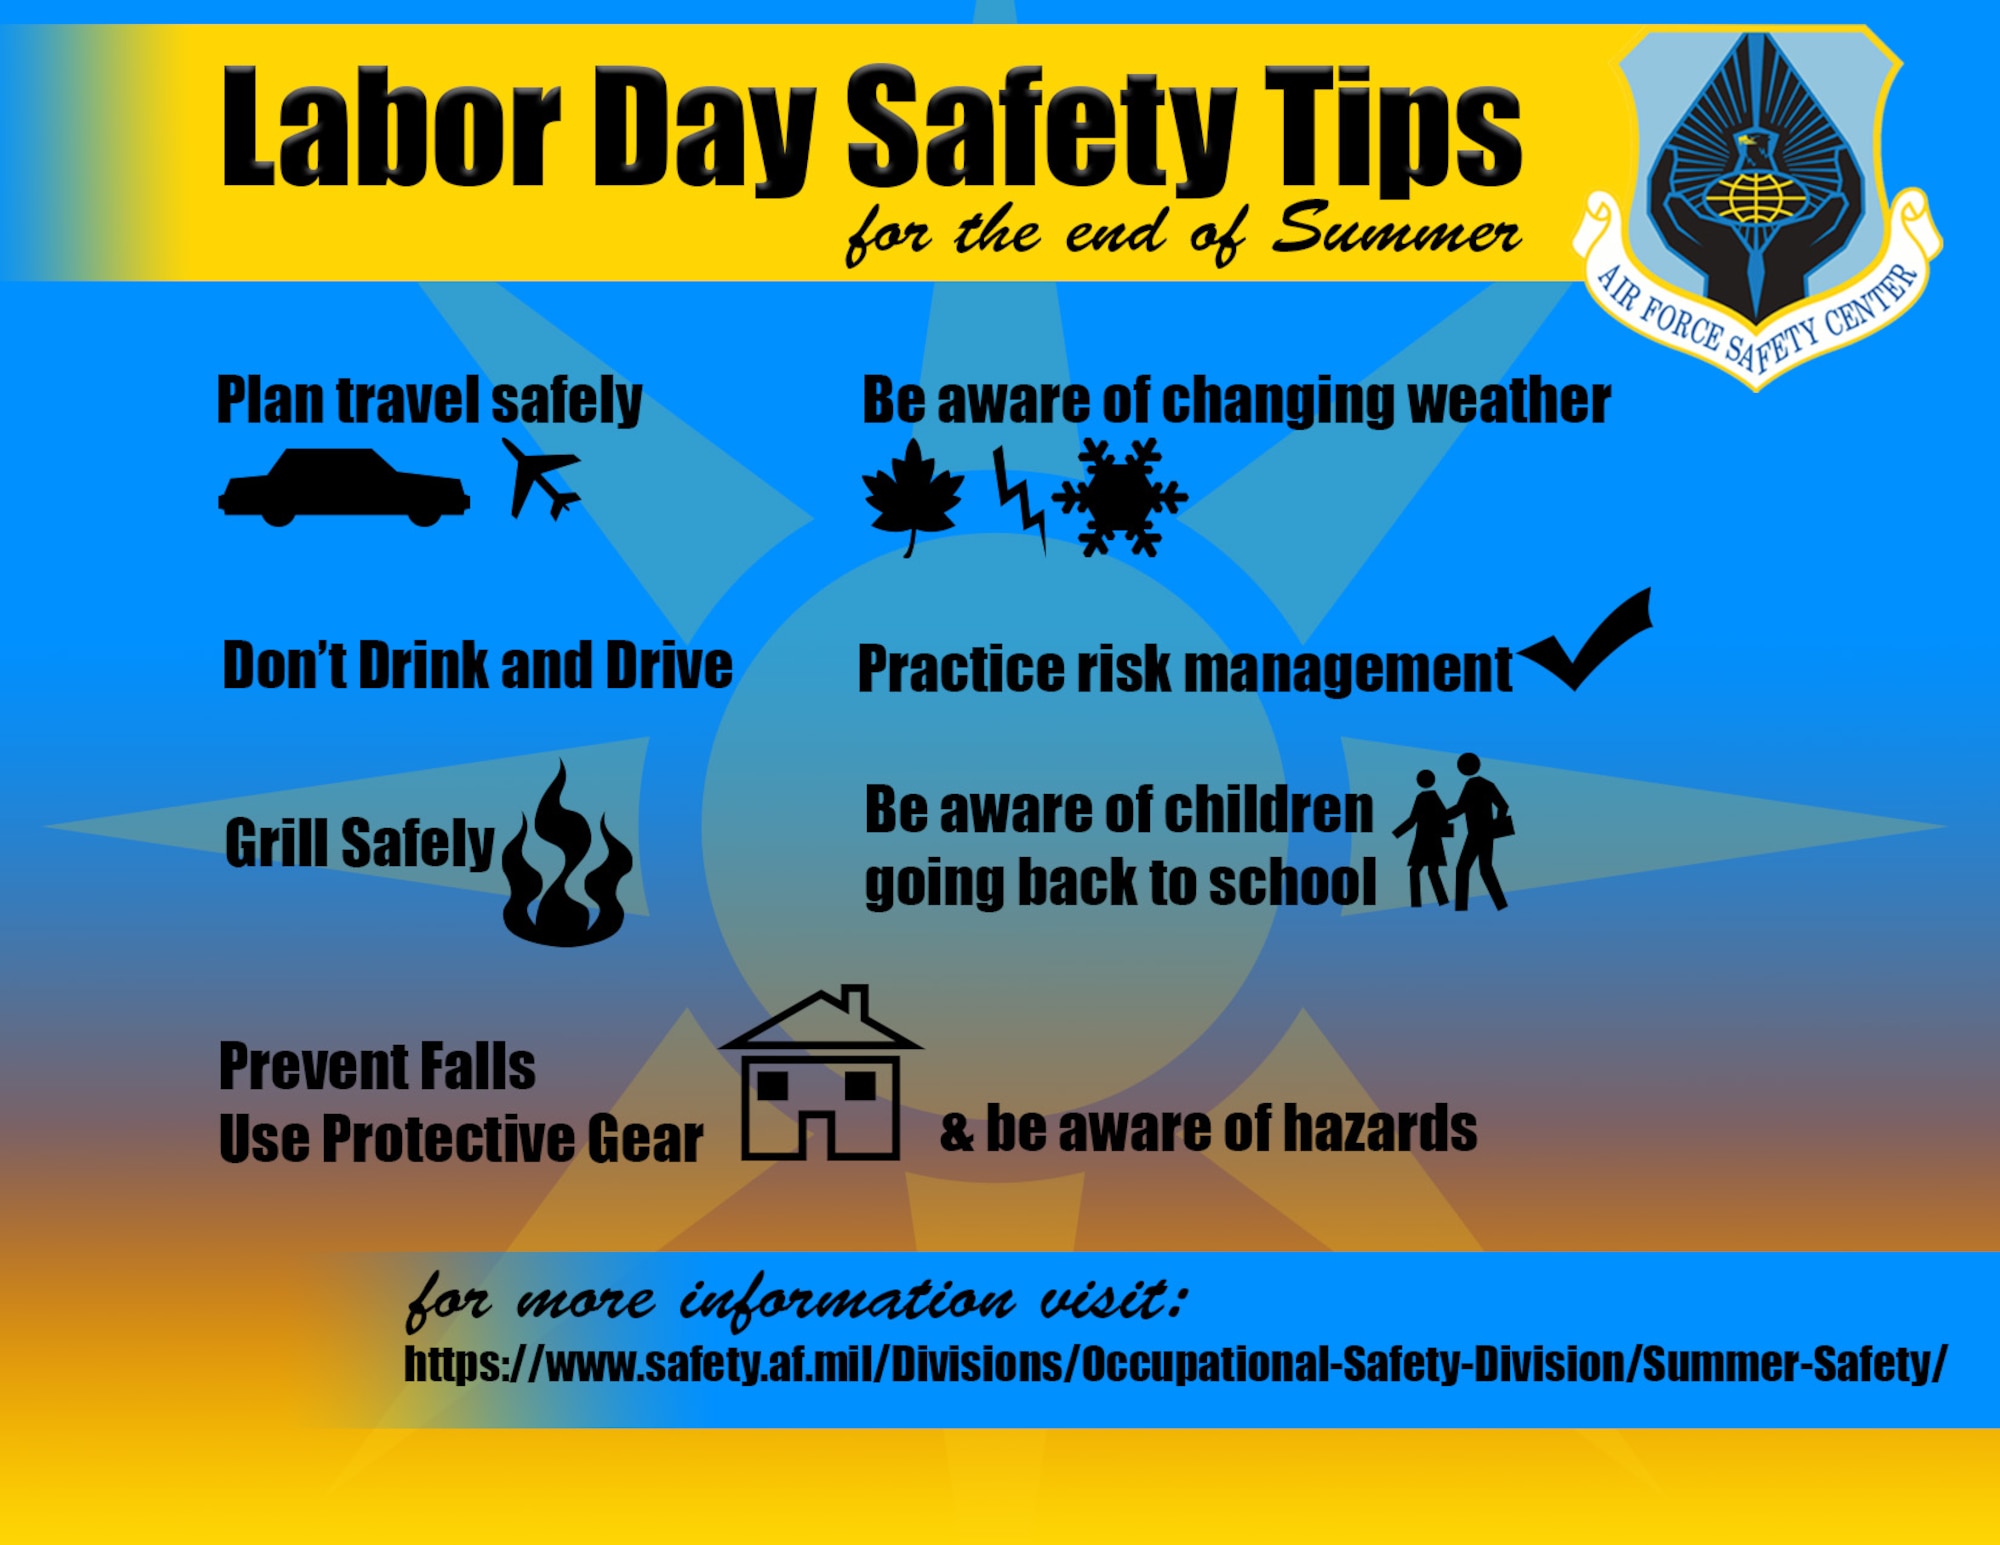 Keep safety in mind as summer ends > Air Force Safety Center